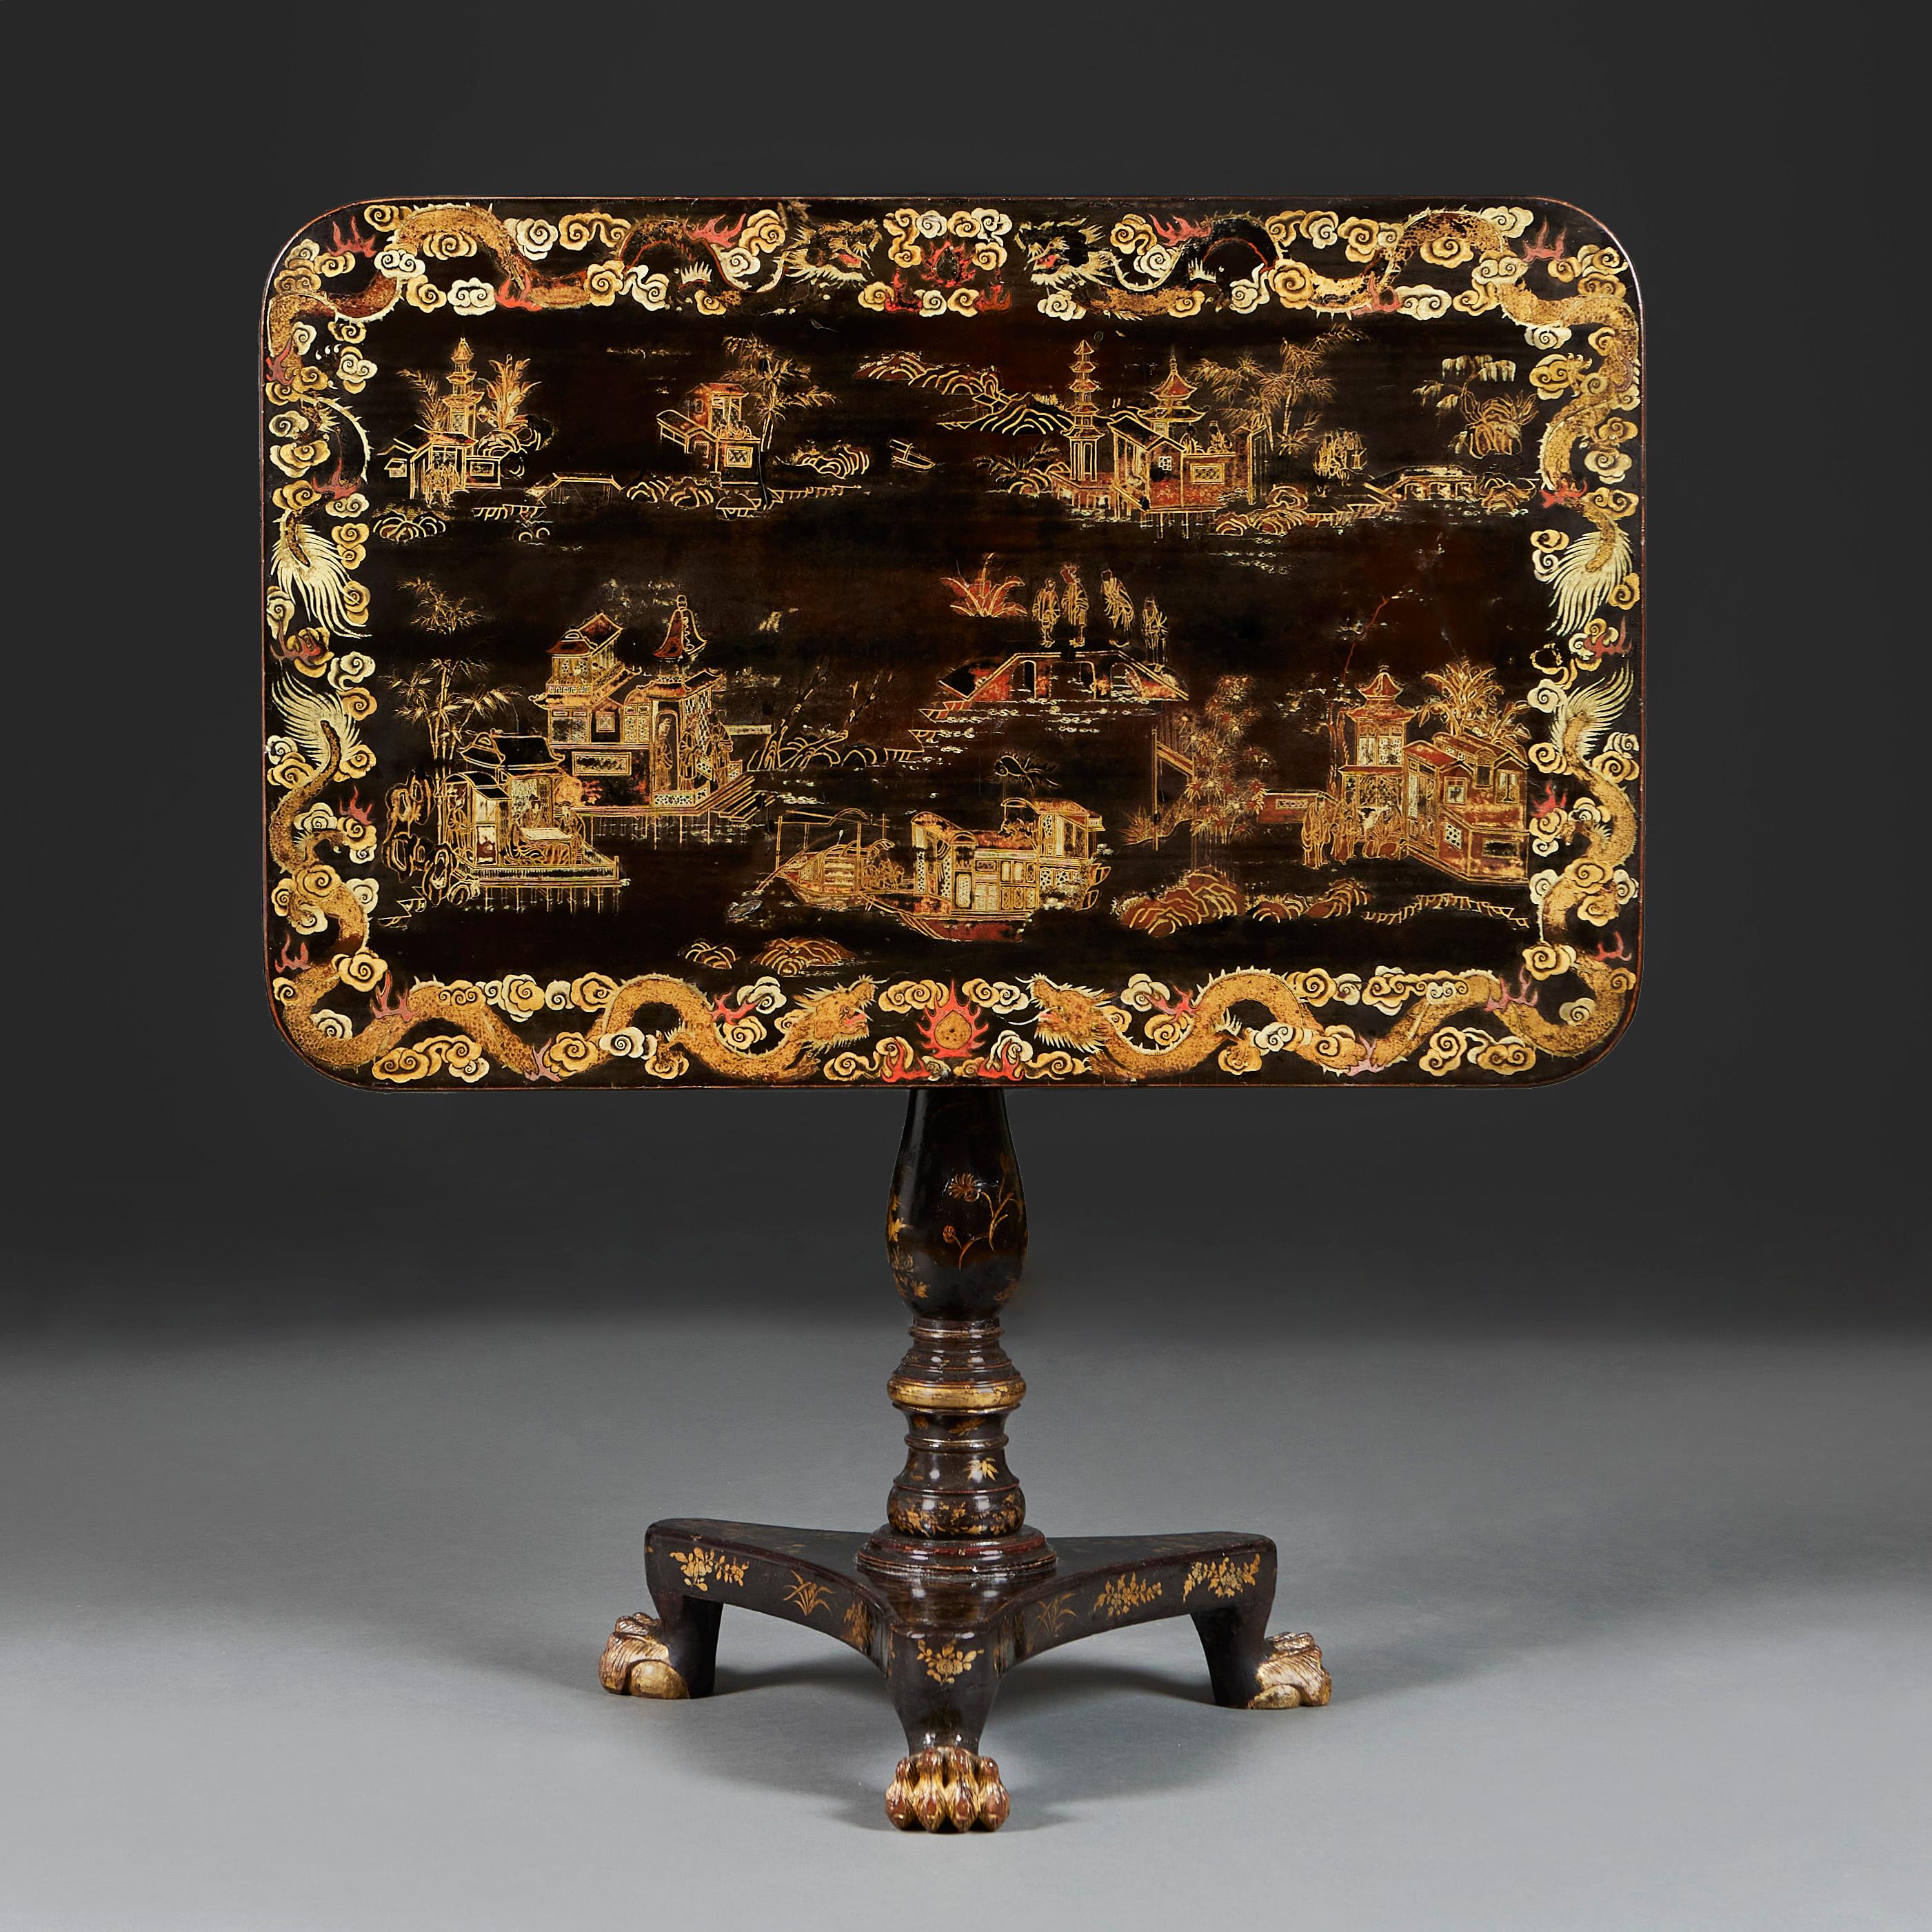 Lacquered Mid-19th Century Chinese Export Lacquer Centre Table